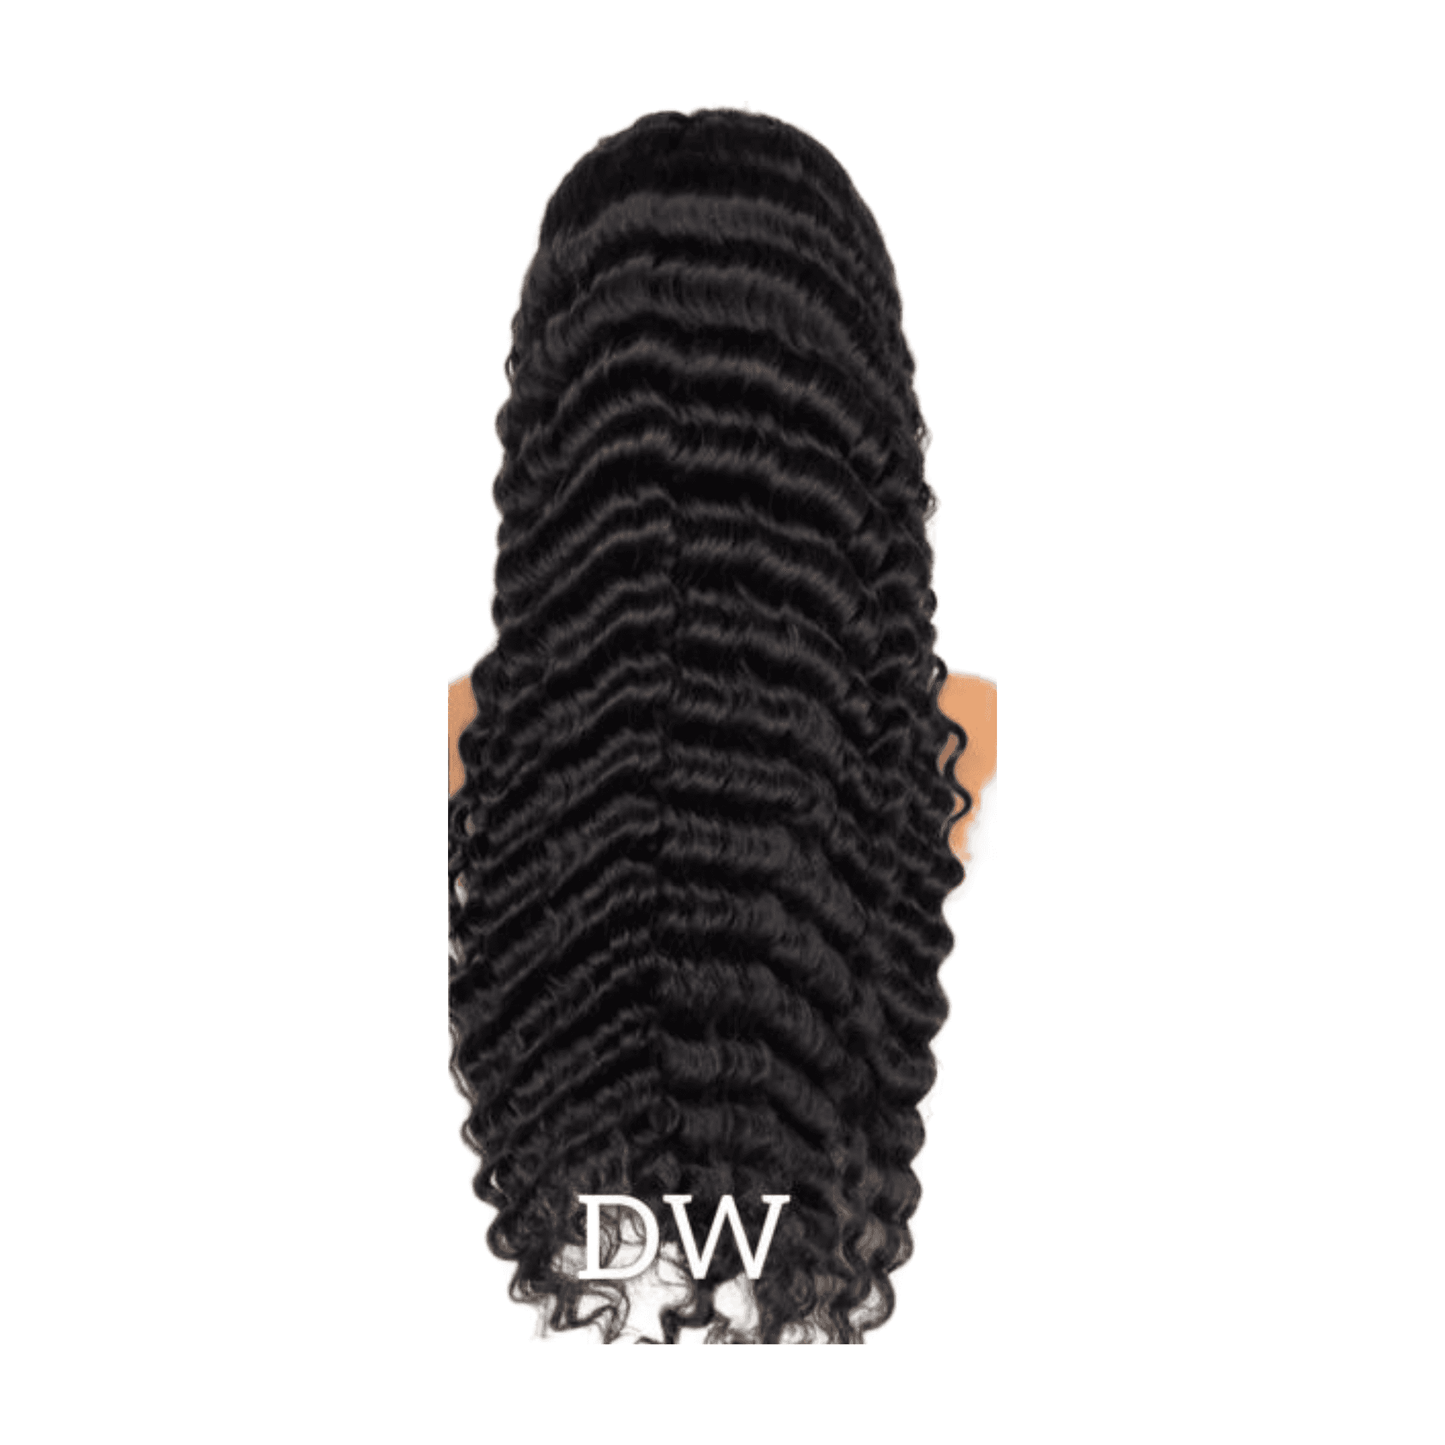 CAPD•HD Lace Wig Full Frontal 13X4 Deep Wave - CAPD INSPIRED HAIR INC.